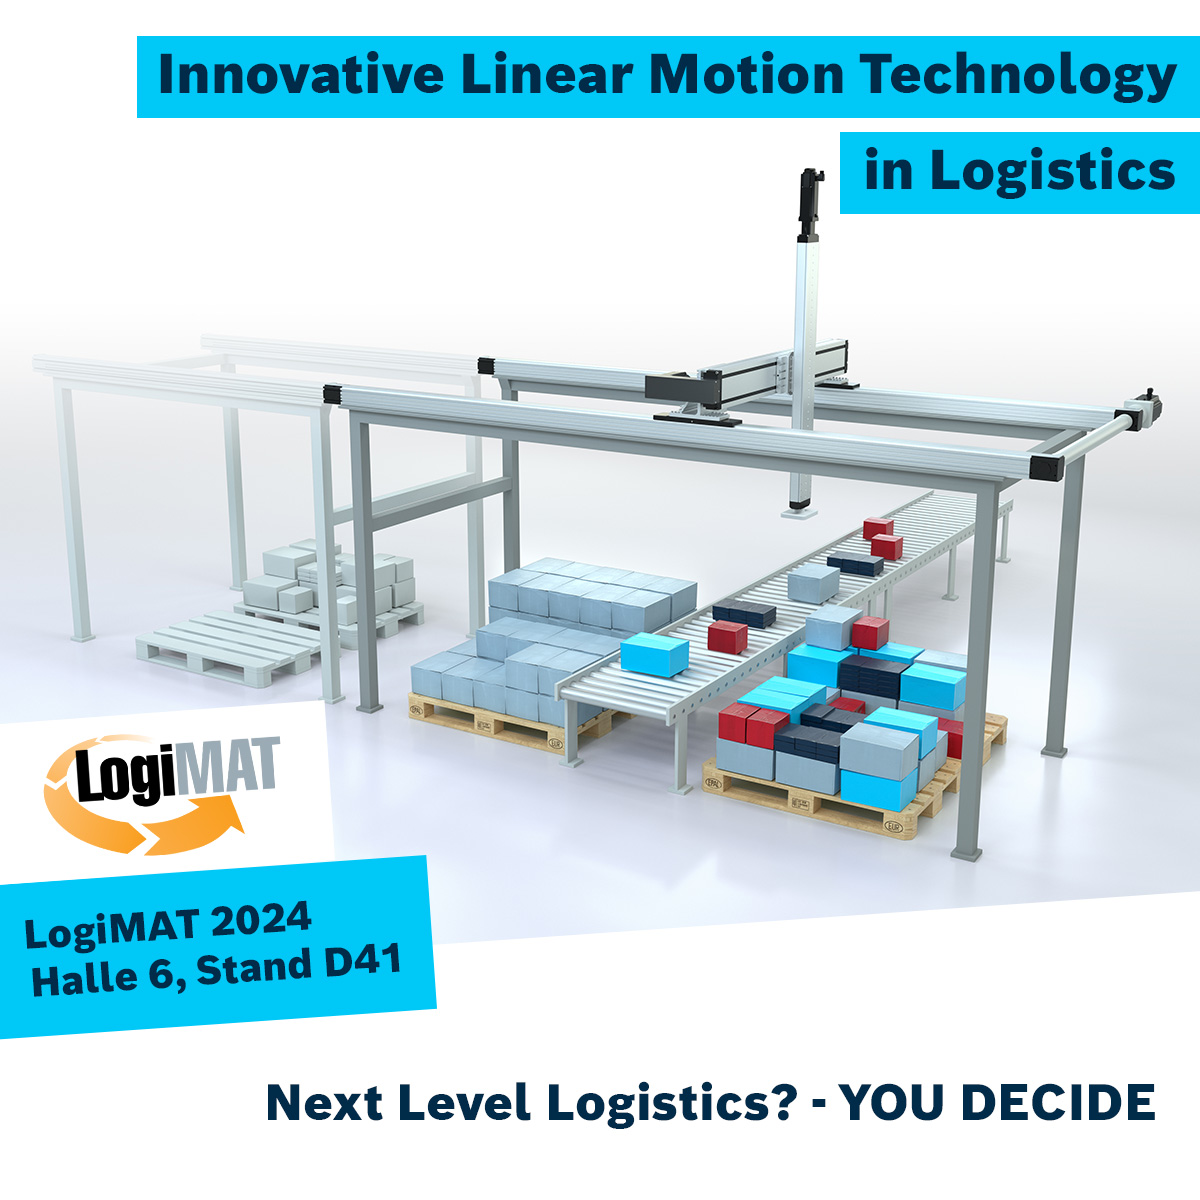 Automation pressure in logistics: At @LogiMAT, #BoschRexroth will be showing how innovative #LinearMotionTechnology saves time and money while driving electrification forward. boschrexroth.com/linear-motion-… Visit us in hall 6, booth D41.